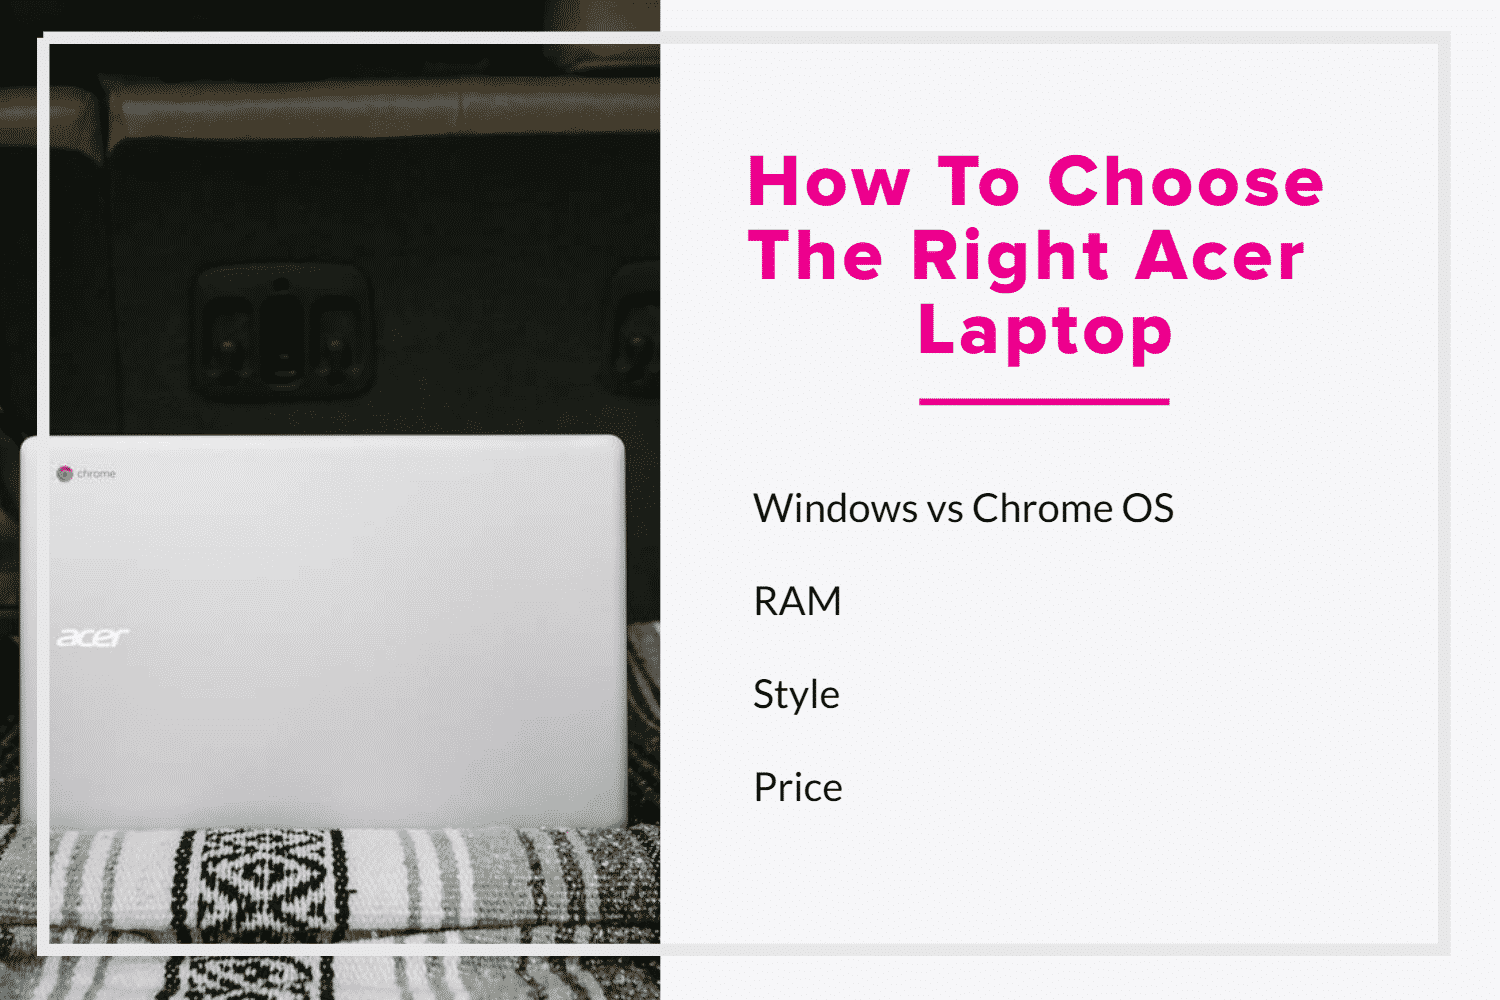 How To Choose The Right Acer Laptop